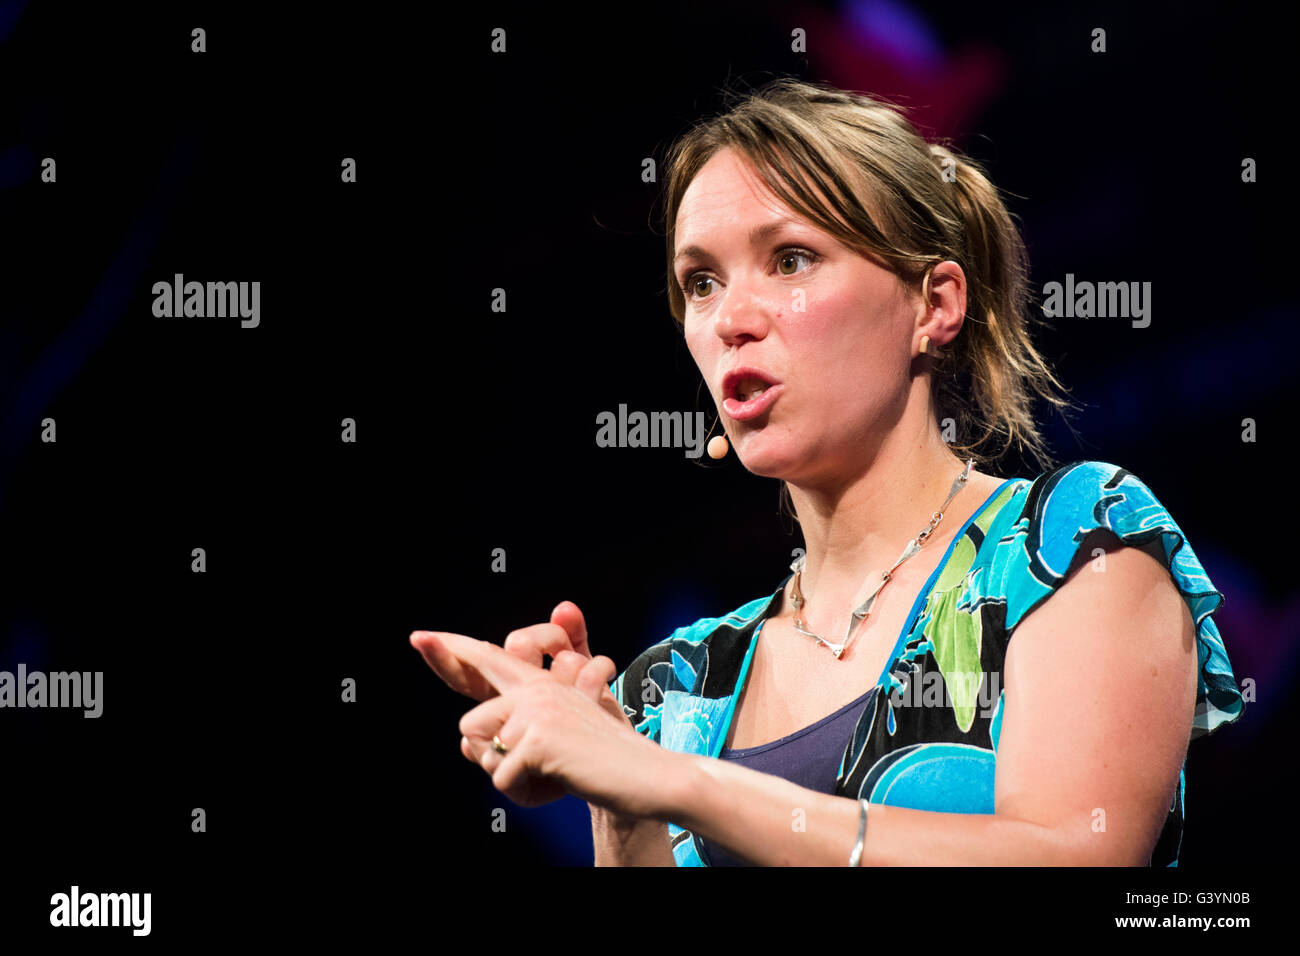 Dr Hannah Critchlow,  neuroscientist, Cambridge academic, television presenter, science popularist, speaking on stage at The Hay Festival, Saturday 28 May 2016 Stock Photo